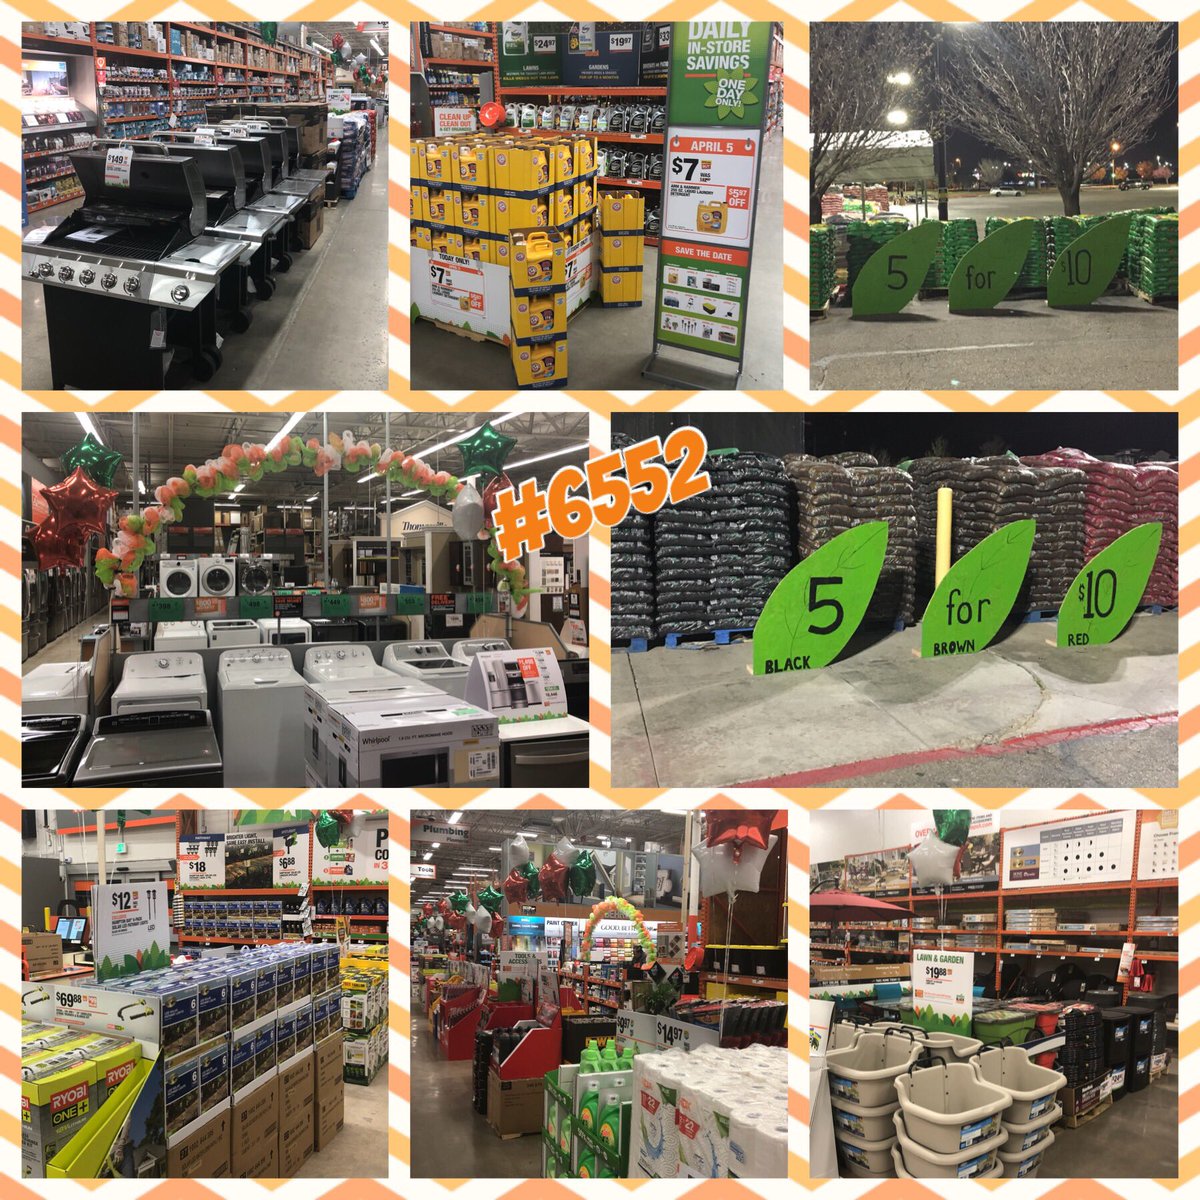 #6552 Amarillo is primed and ready to rock SPRING BLACK FRIDAY! Let’s do this! #Amarillo #SpringBlackFriday